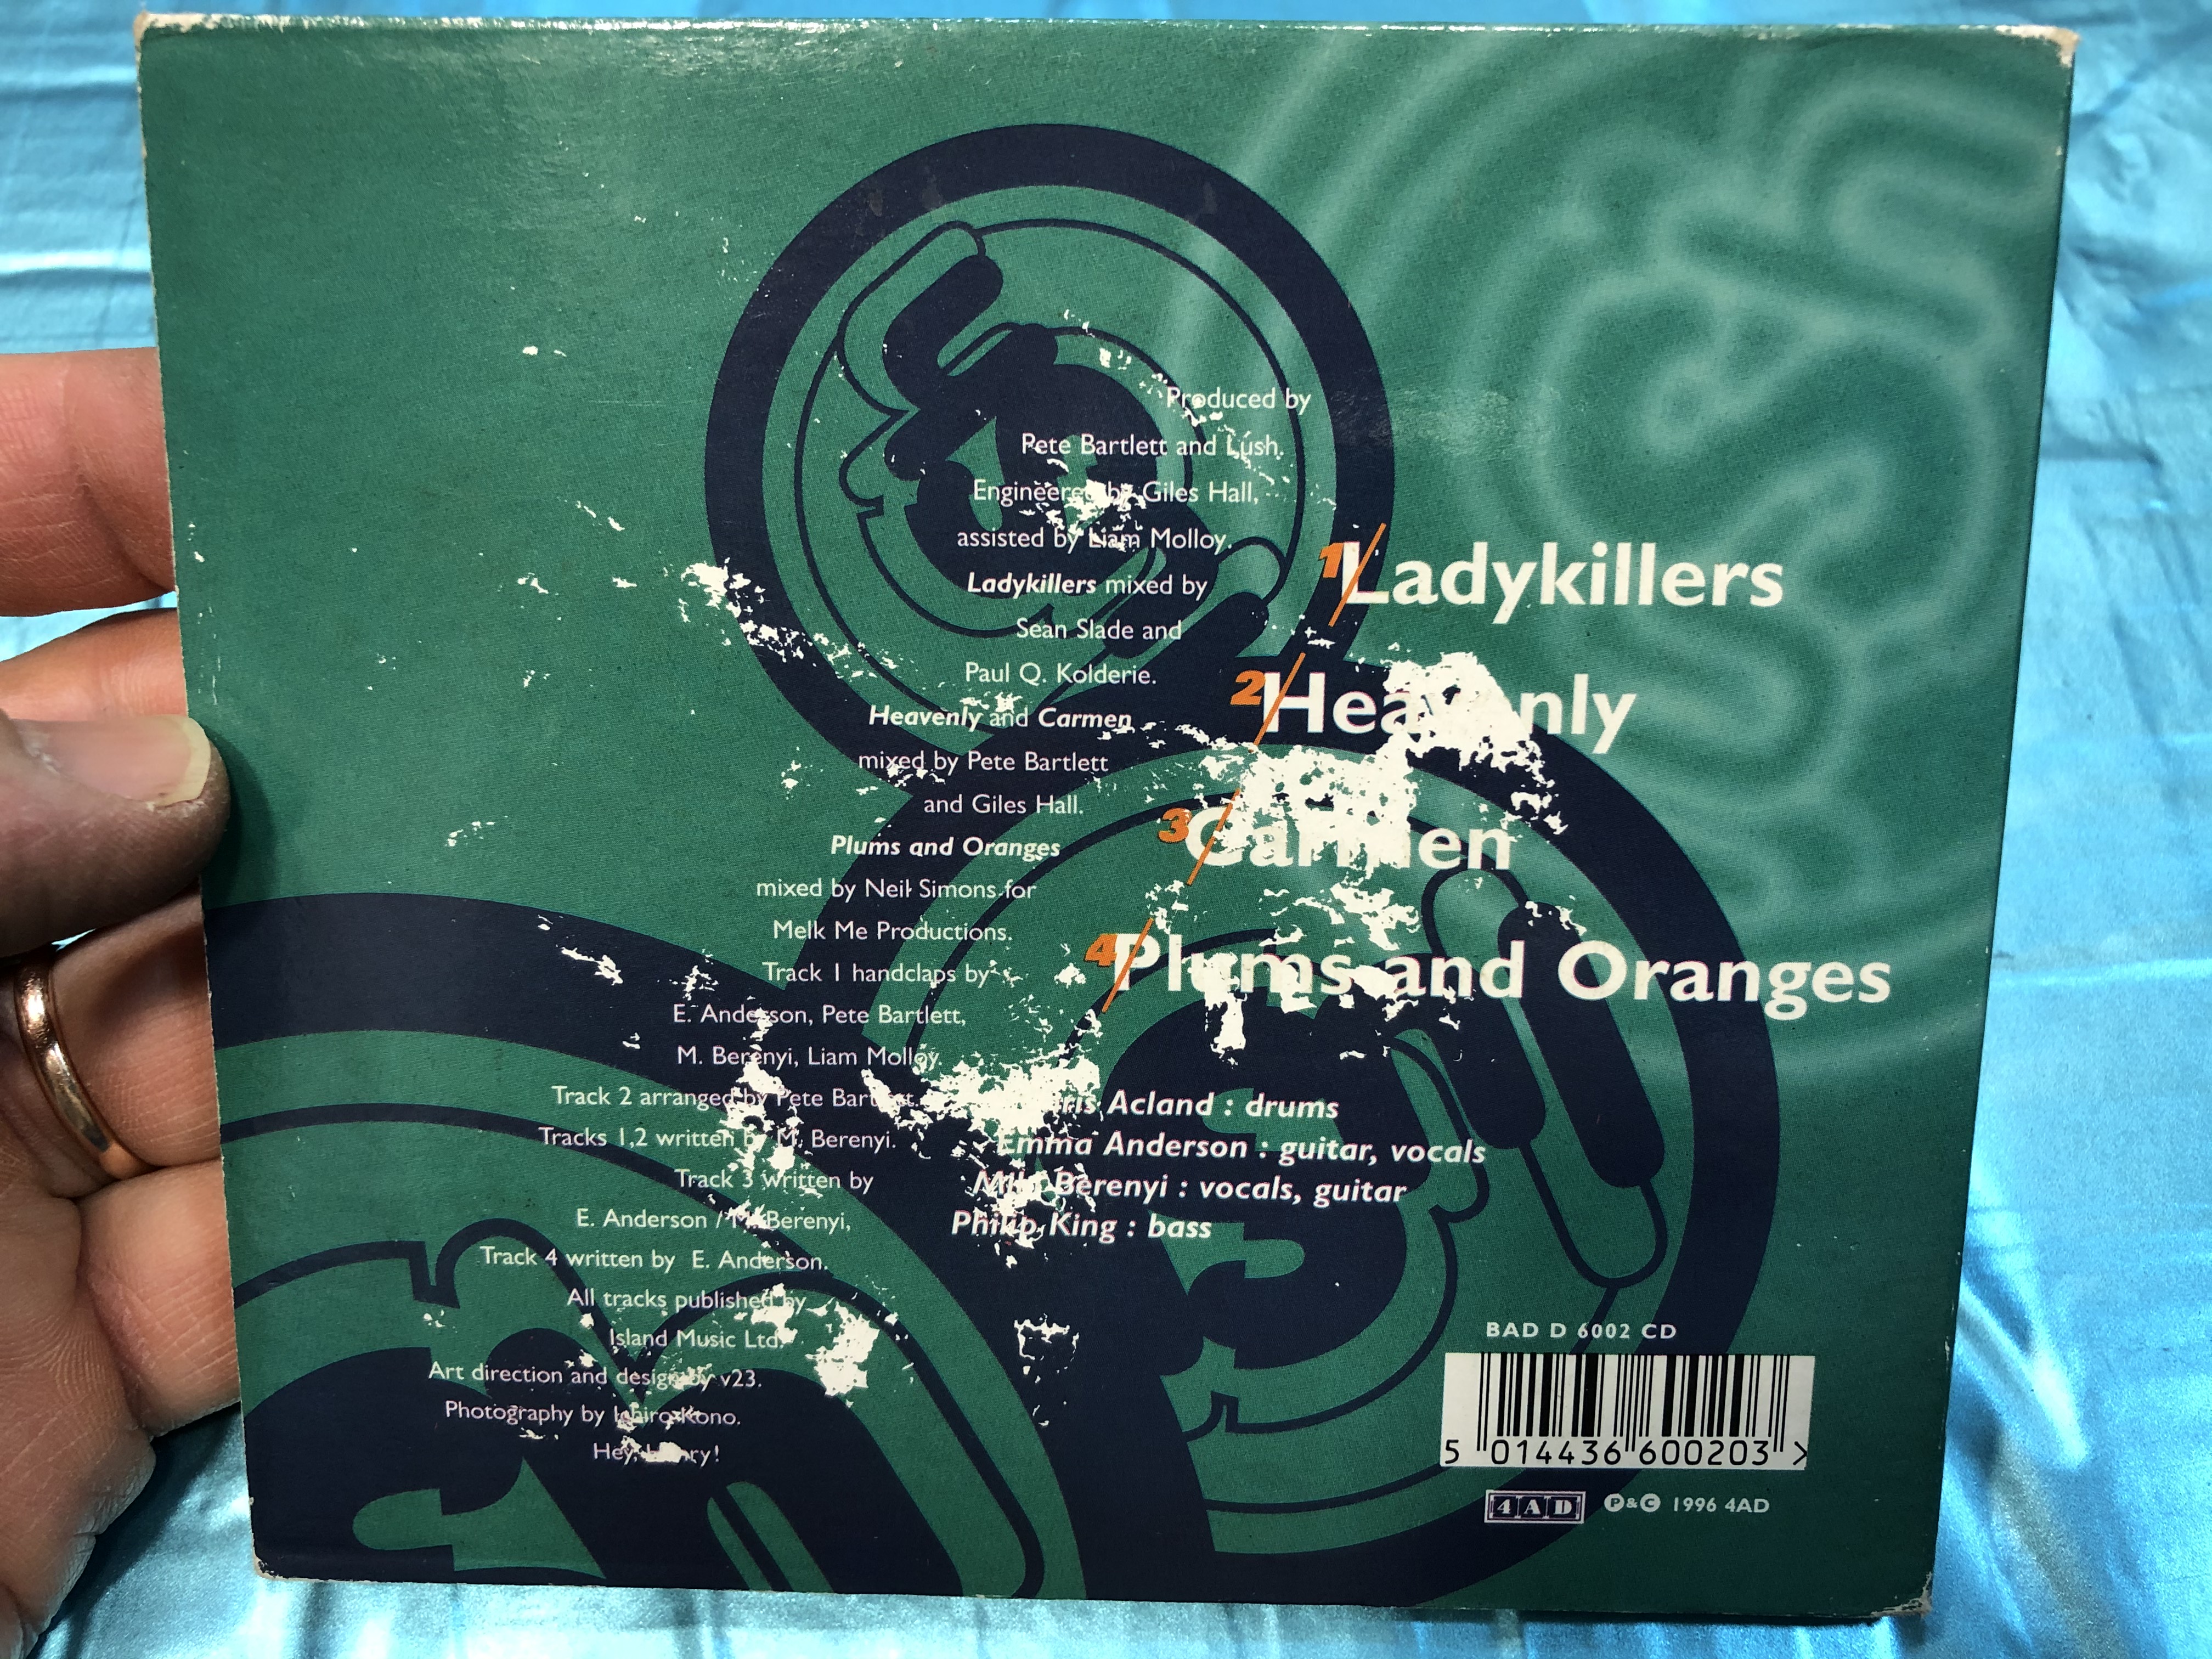 lush-ladykillers-disc-two-4ad-audio-cd-1996-bad-d-6002-cd-4-.jpg